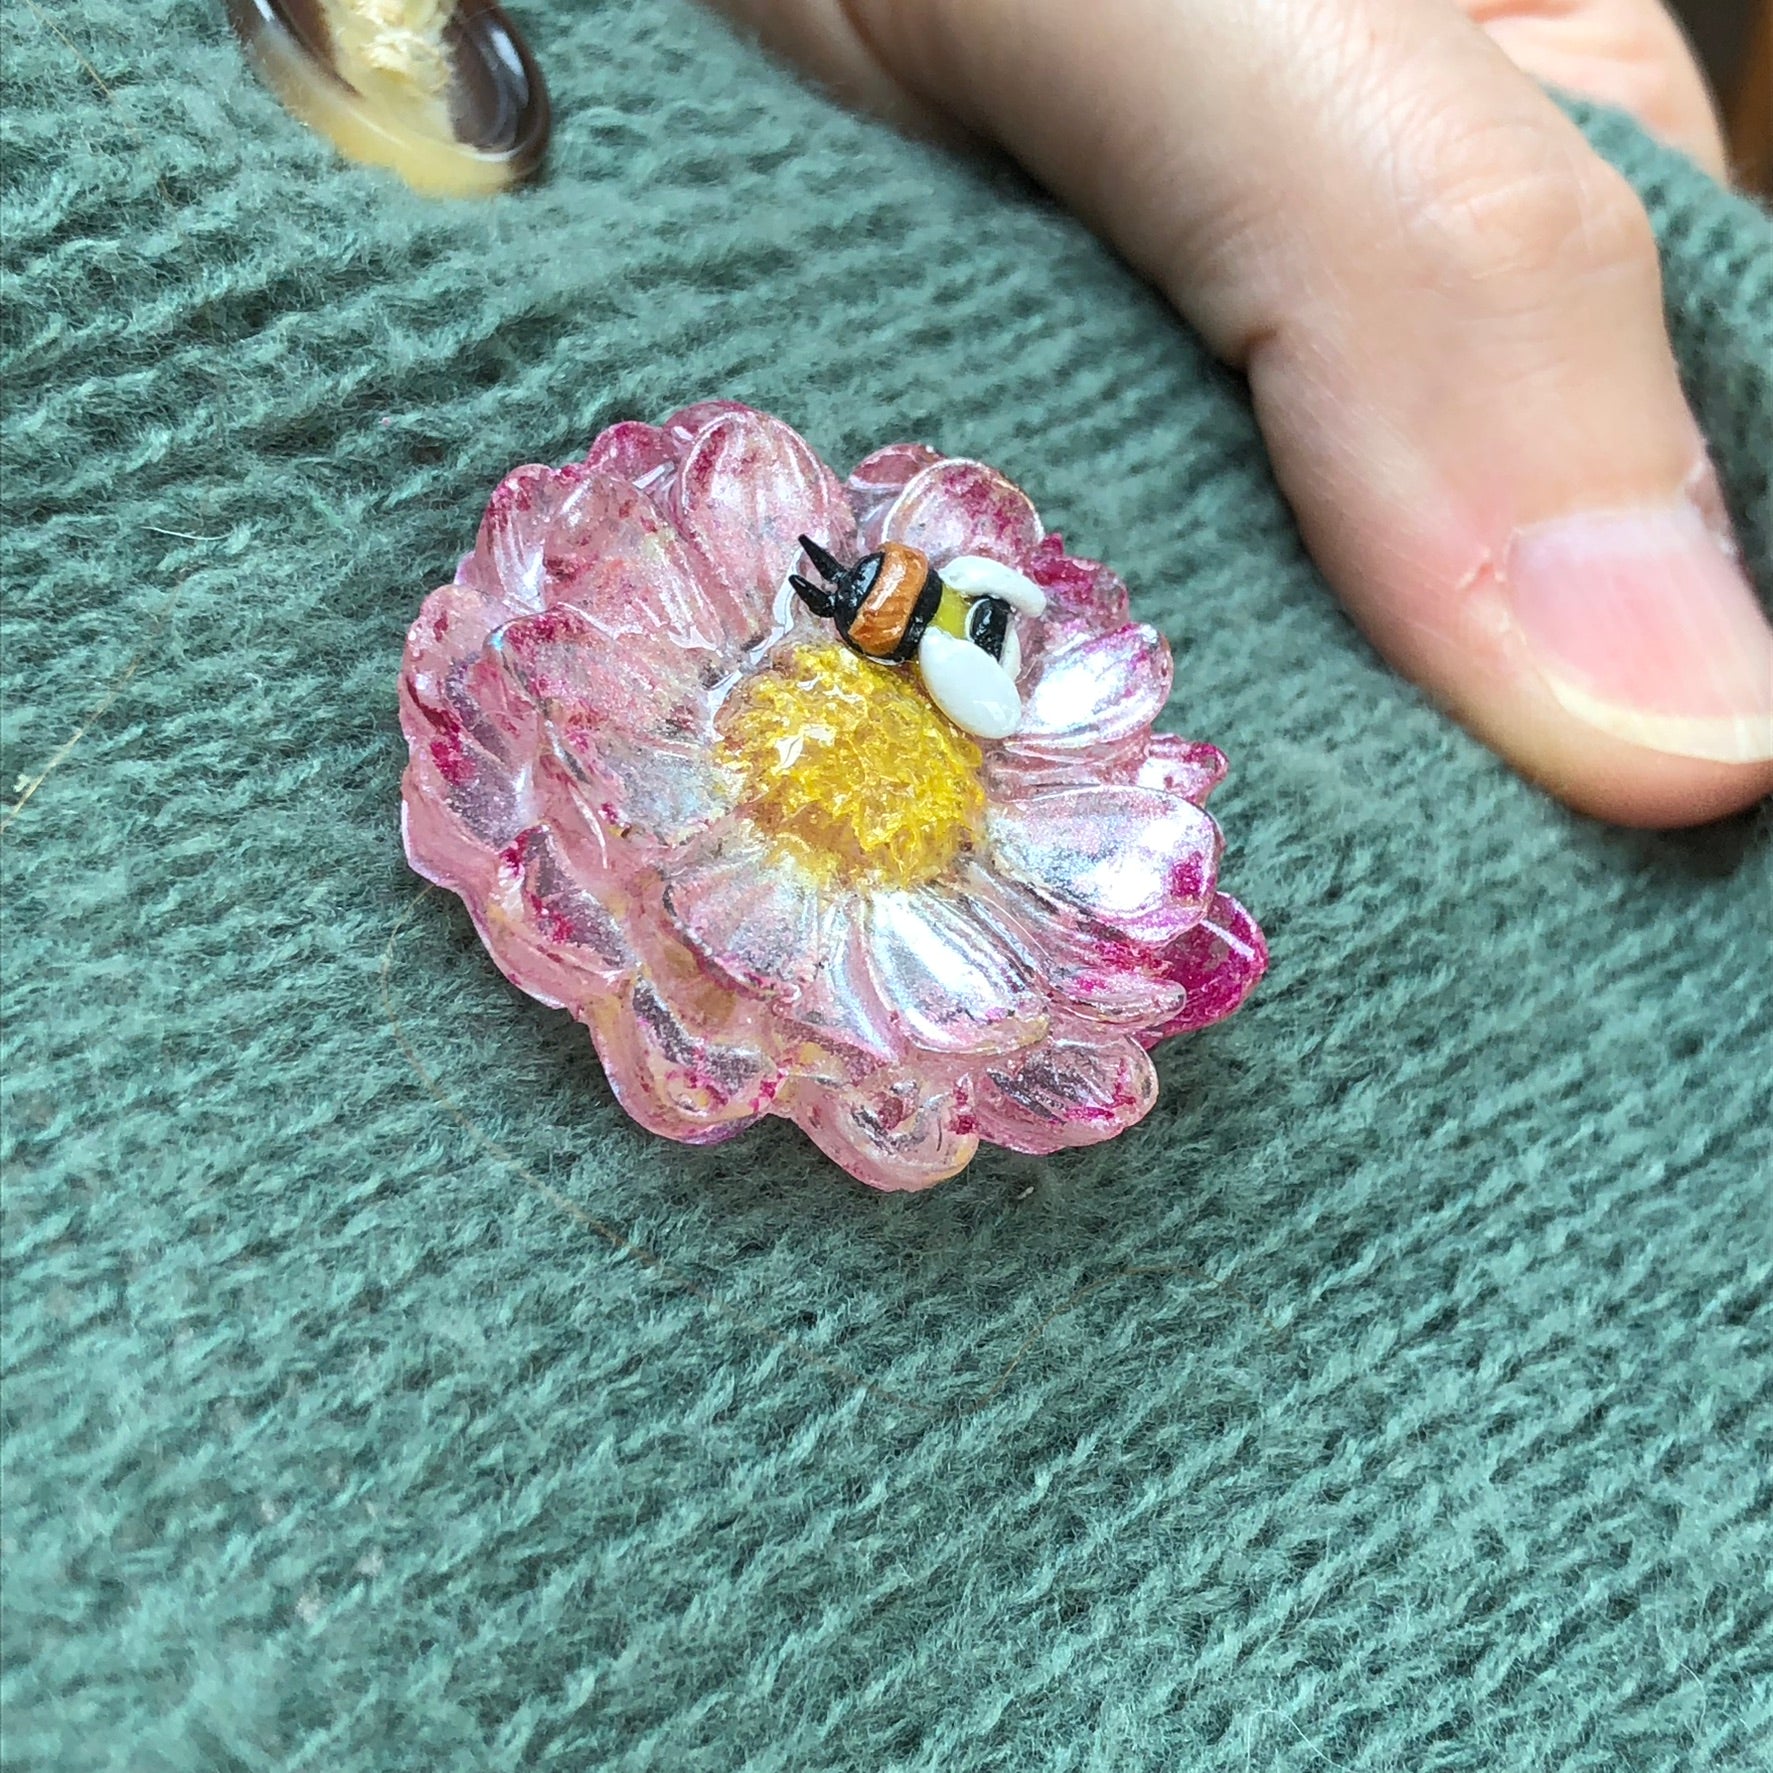 Miniature Handmade Polymer Clay Bee on Epoxy Resin Flower Lapel Pin Br🐝🌸 Buzzing with Elegance: Introducing our Miniature Handmade Polymer Clay Bee on Epoxy Resin Flower Lapel Pin Brooch! 🌸🐝Looking to add a touch of whimsy and natuBee lapel pinPadpod & BerrieMy Fairytale GiftsEpoxy Resin Flower Lapel Pin Brooch